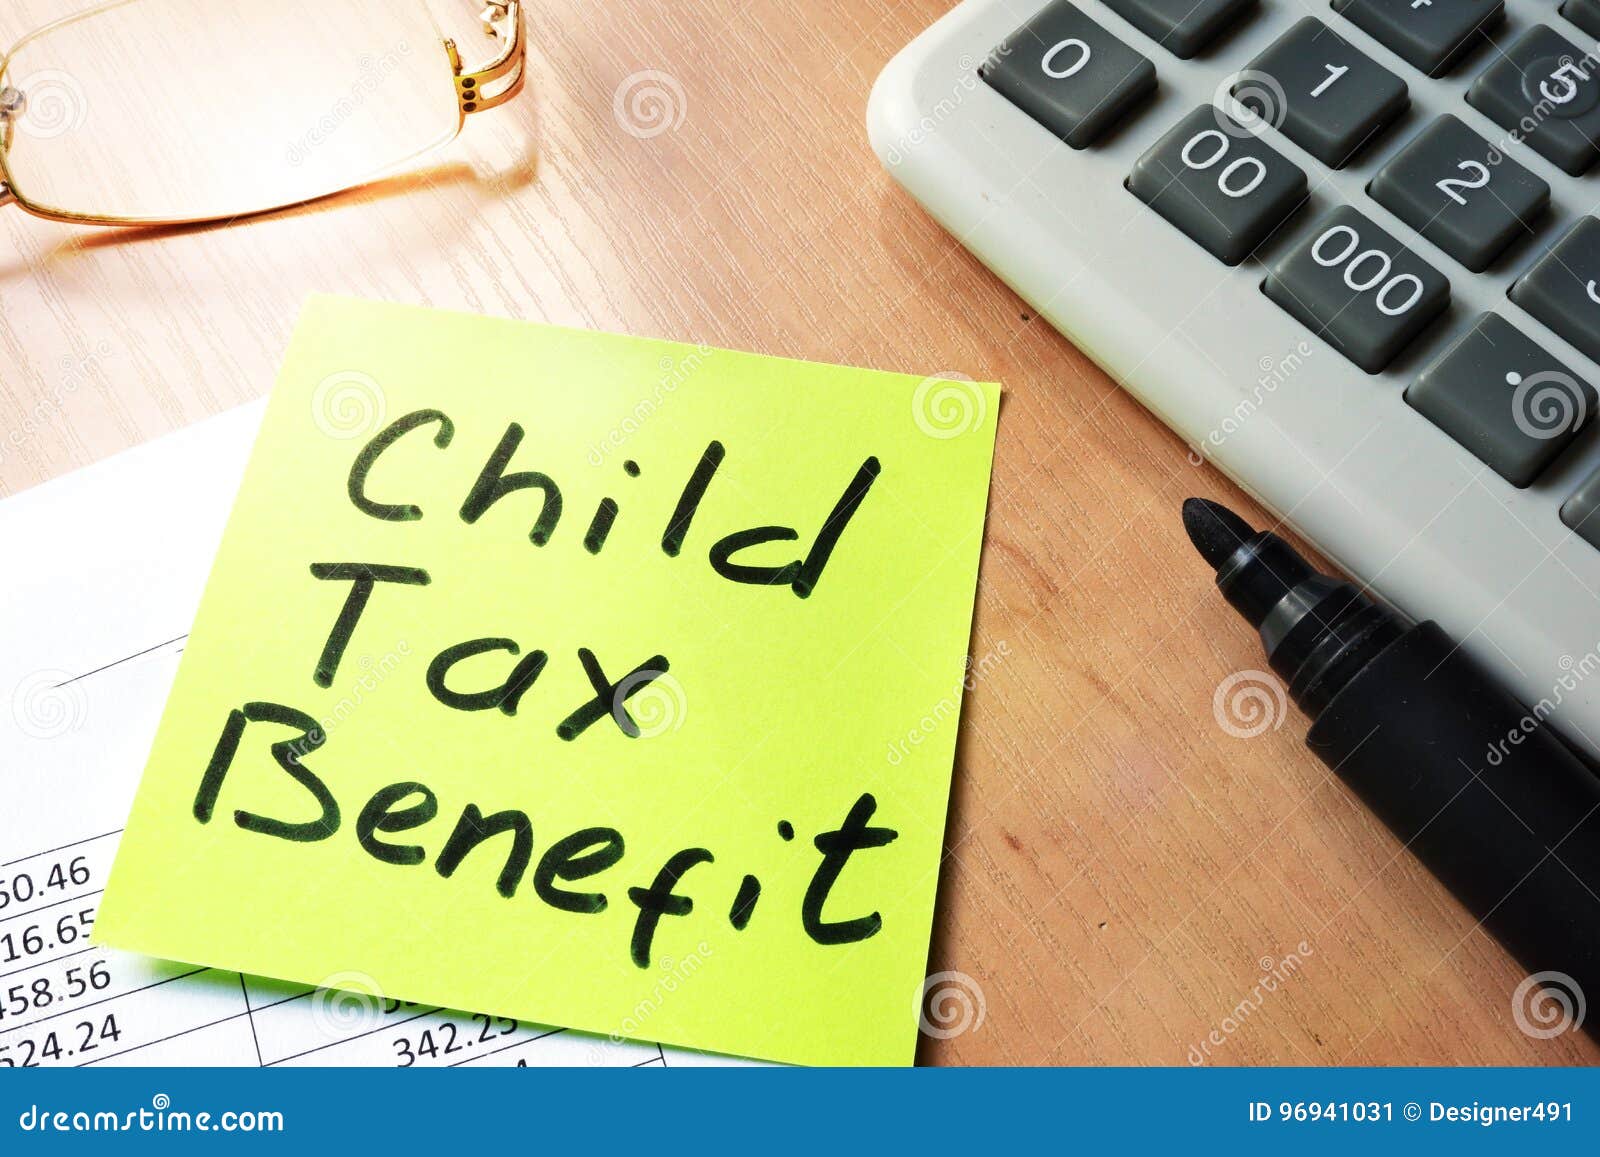 how-to-find-out-child-benefit-number-wastereality13